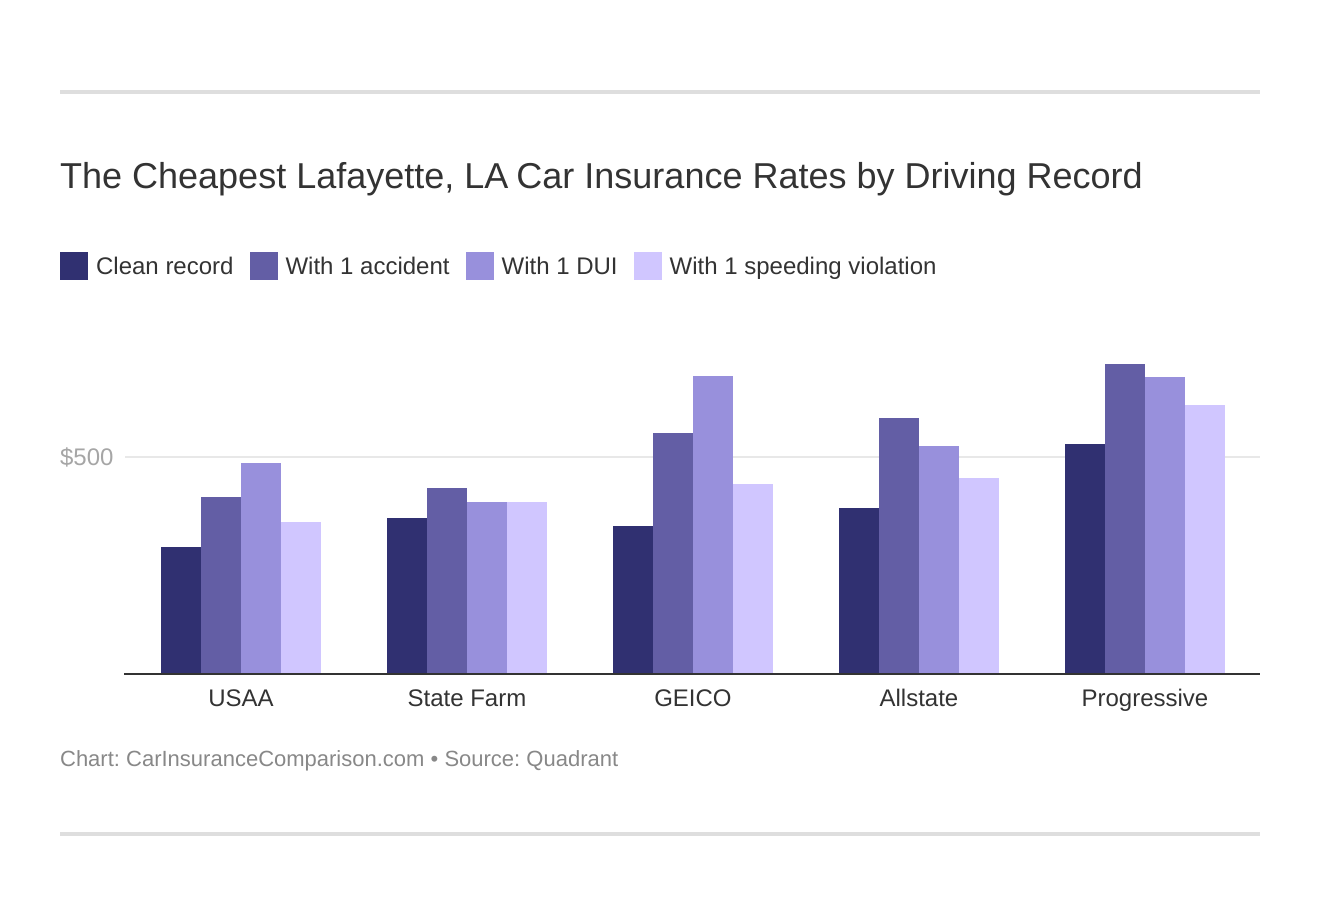 The Cheapest Lafayette, LA Car Insurance Rates by Driving Record